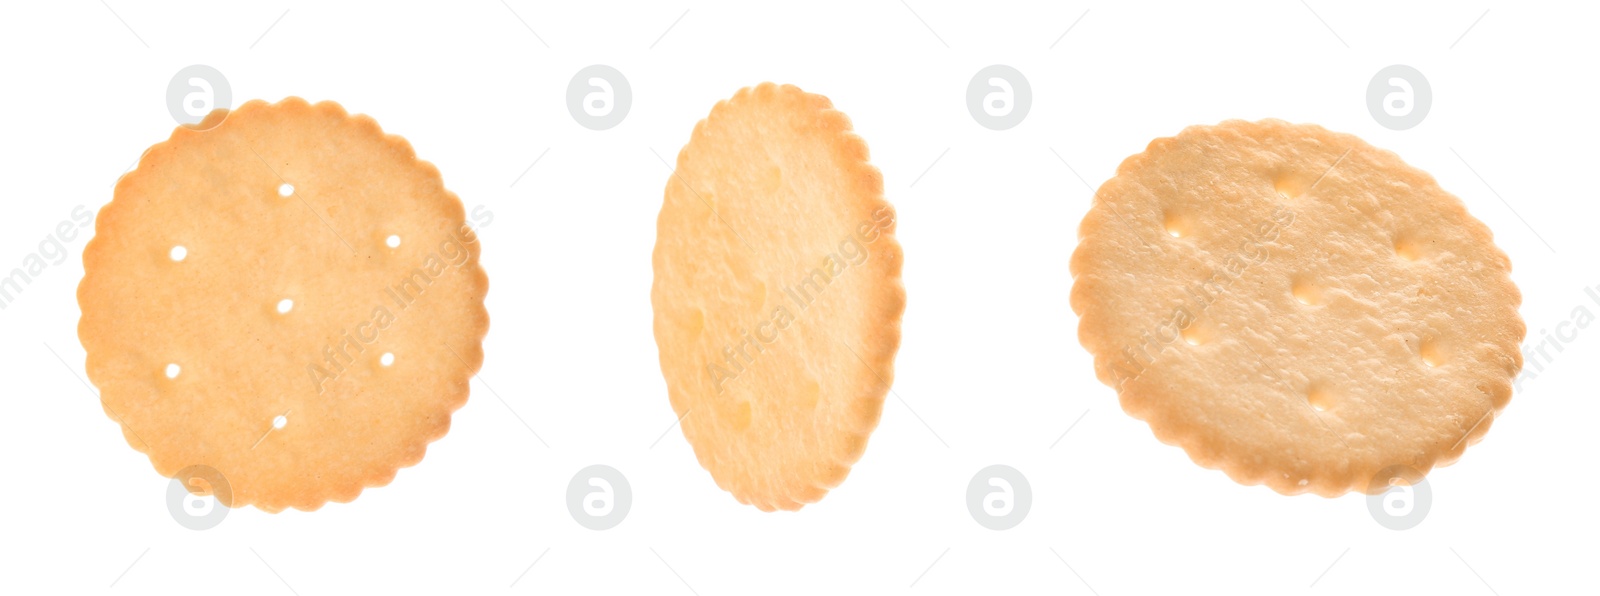 Image of Collage of tasty crackers on white background